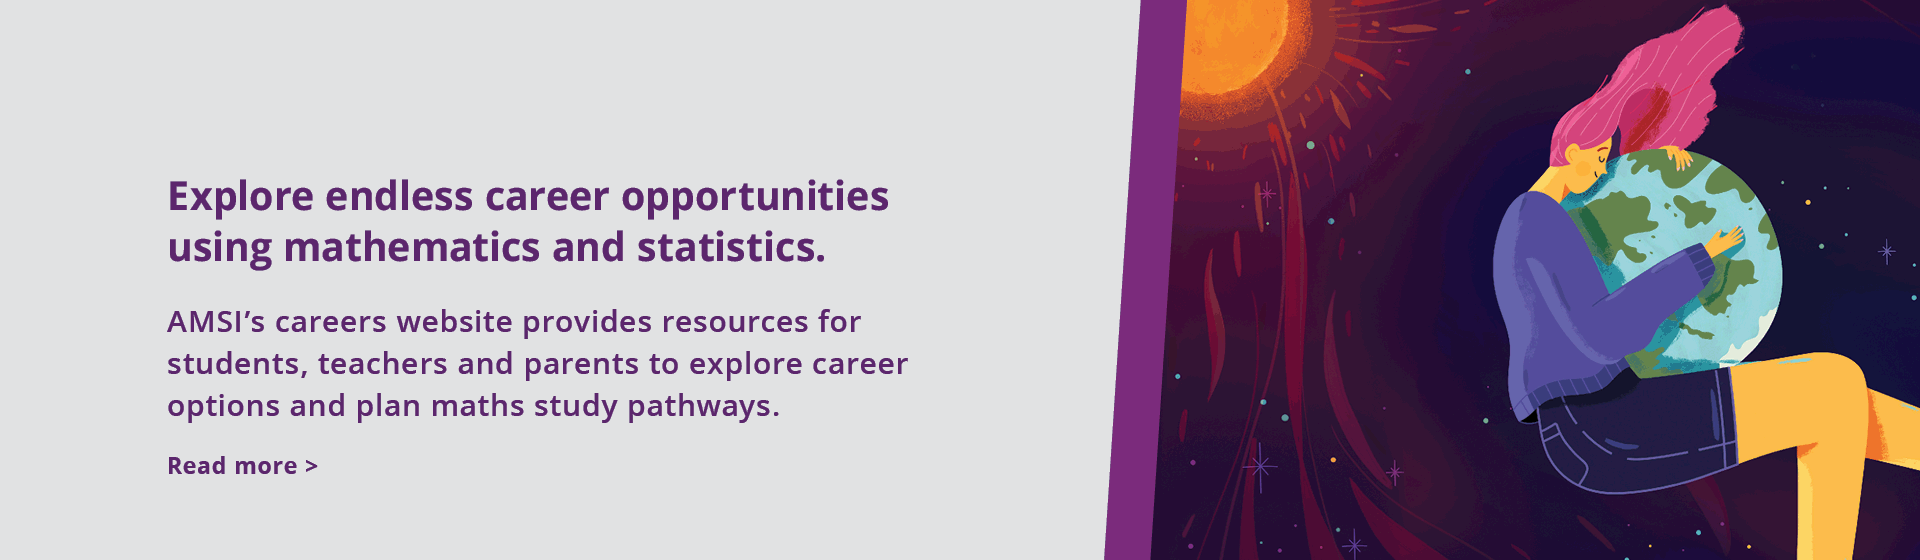 AMSI’s careers website provides resources for students, teachers and parents to explore career options and plan maths study pathways.